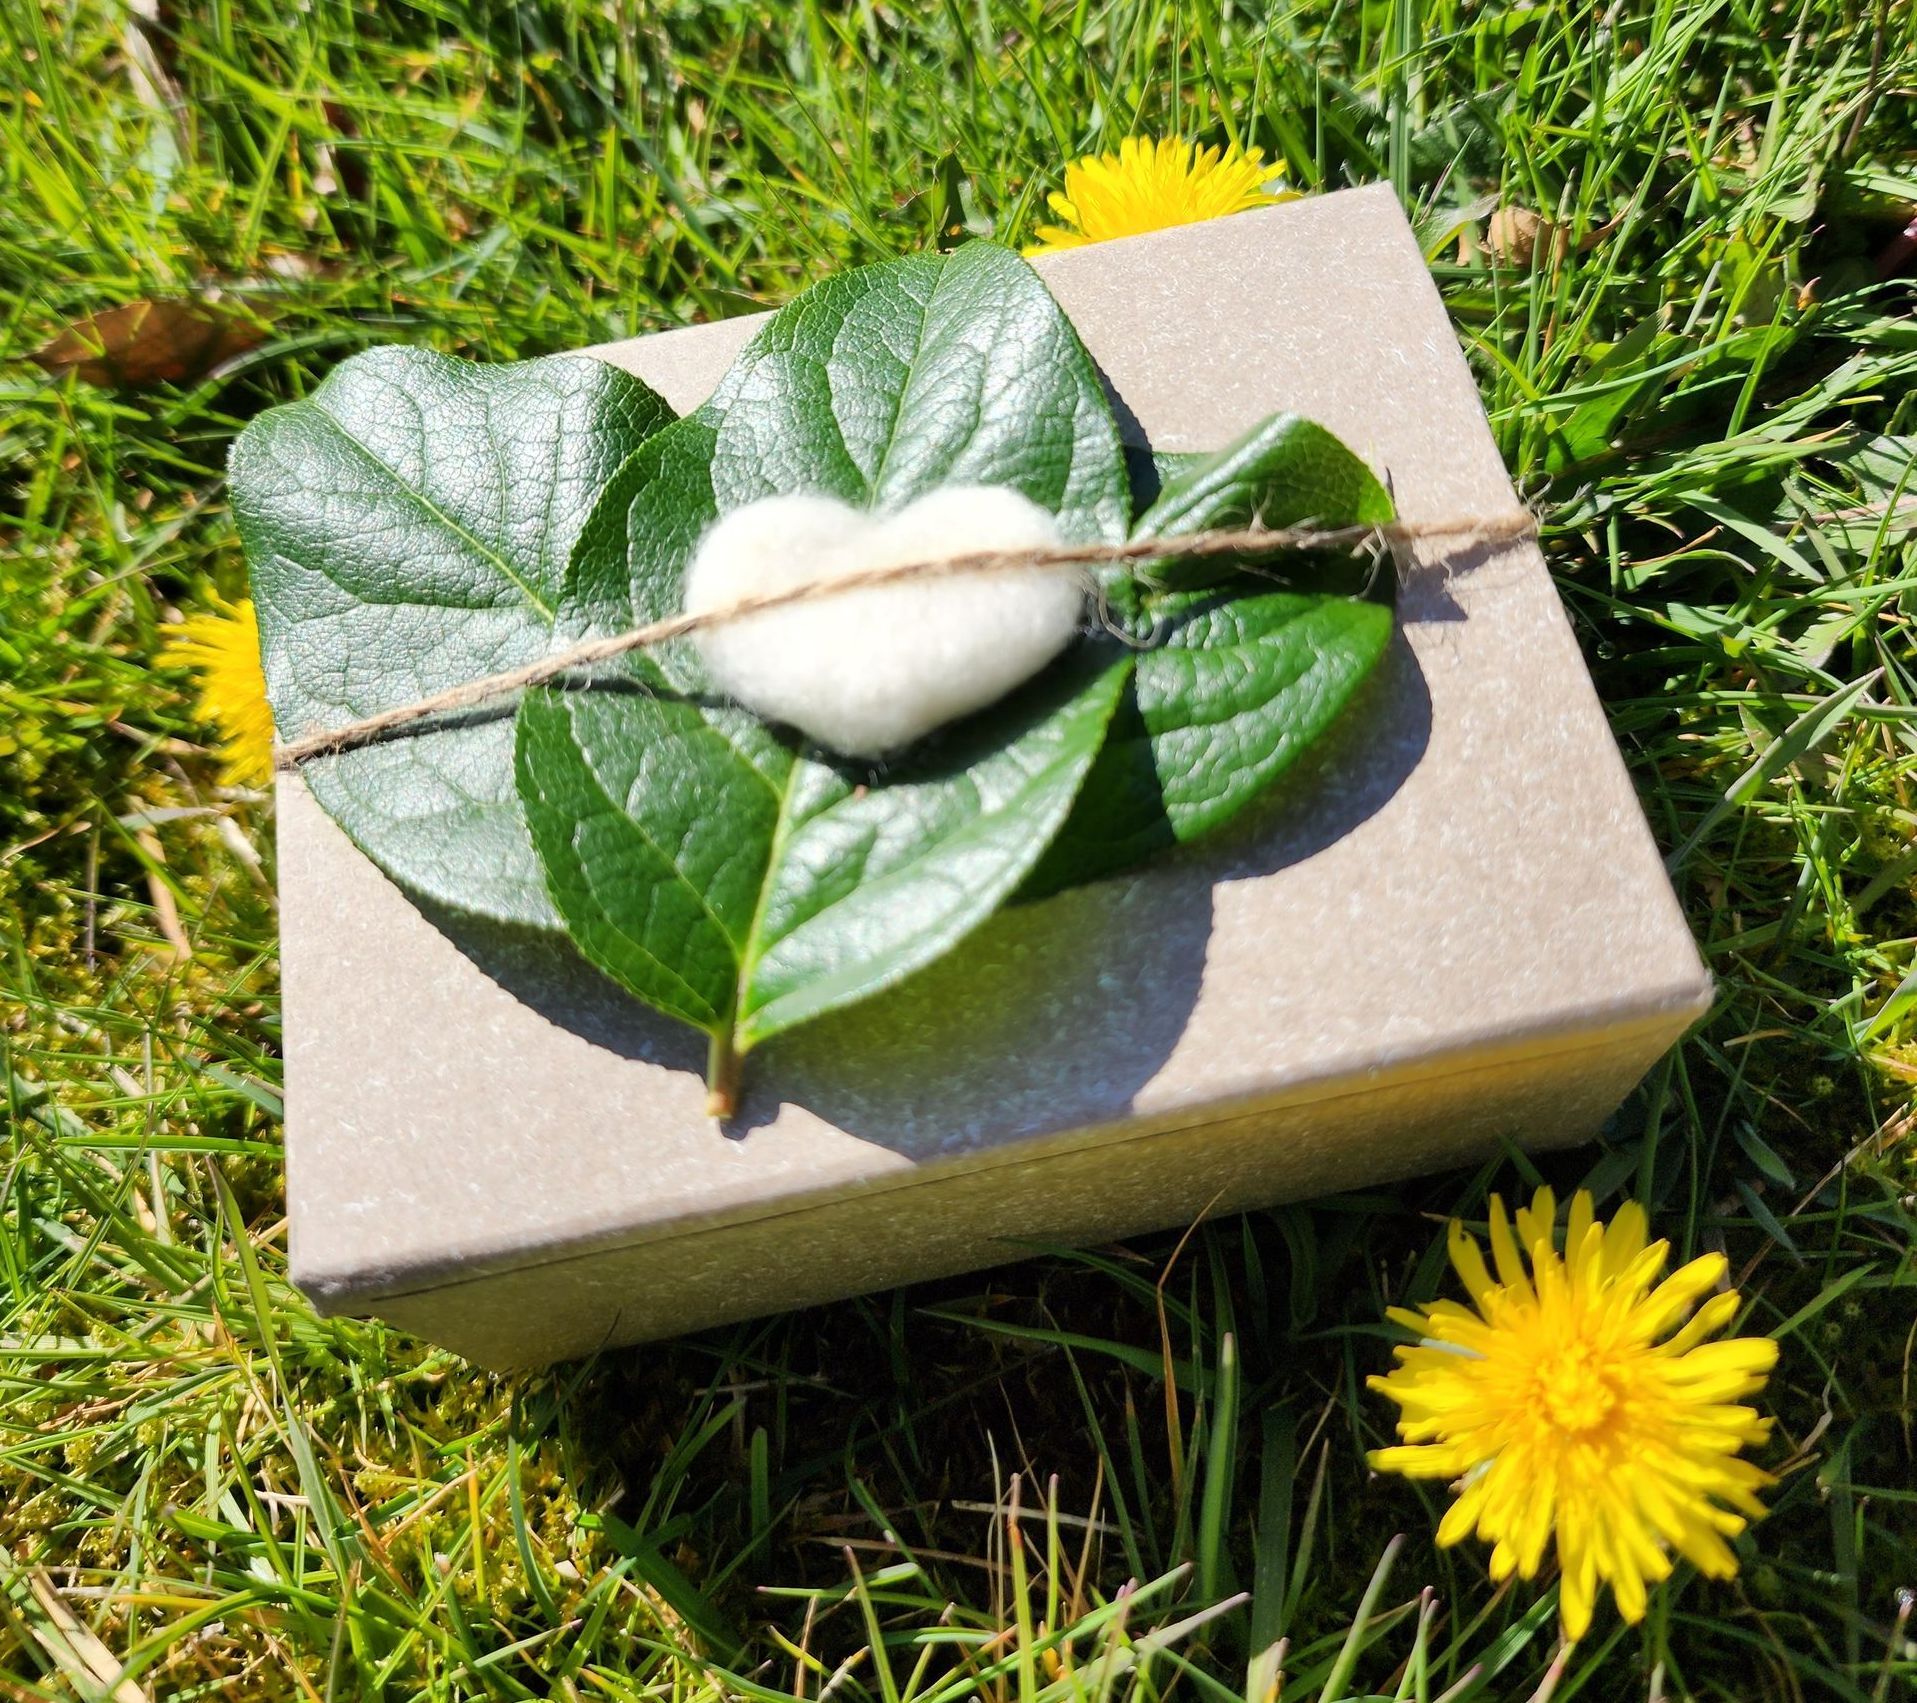 eco friendly cremation box secured with twine and adored with leaves and a felt heart